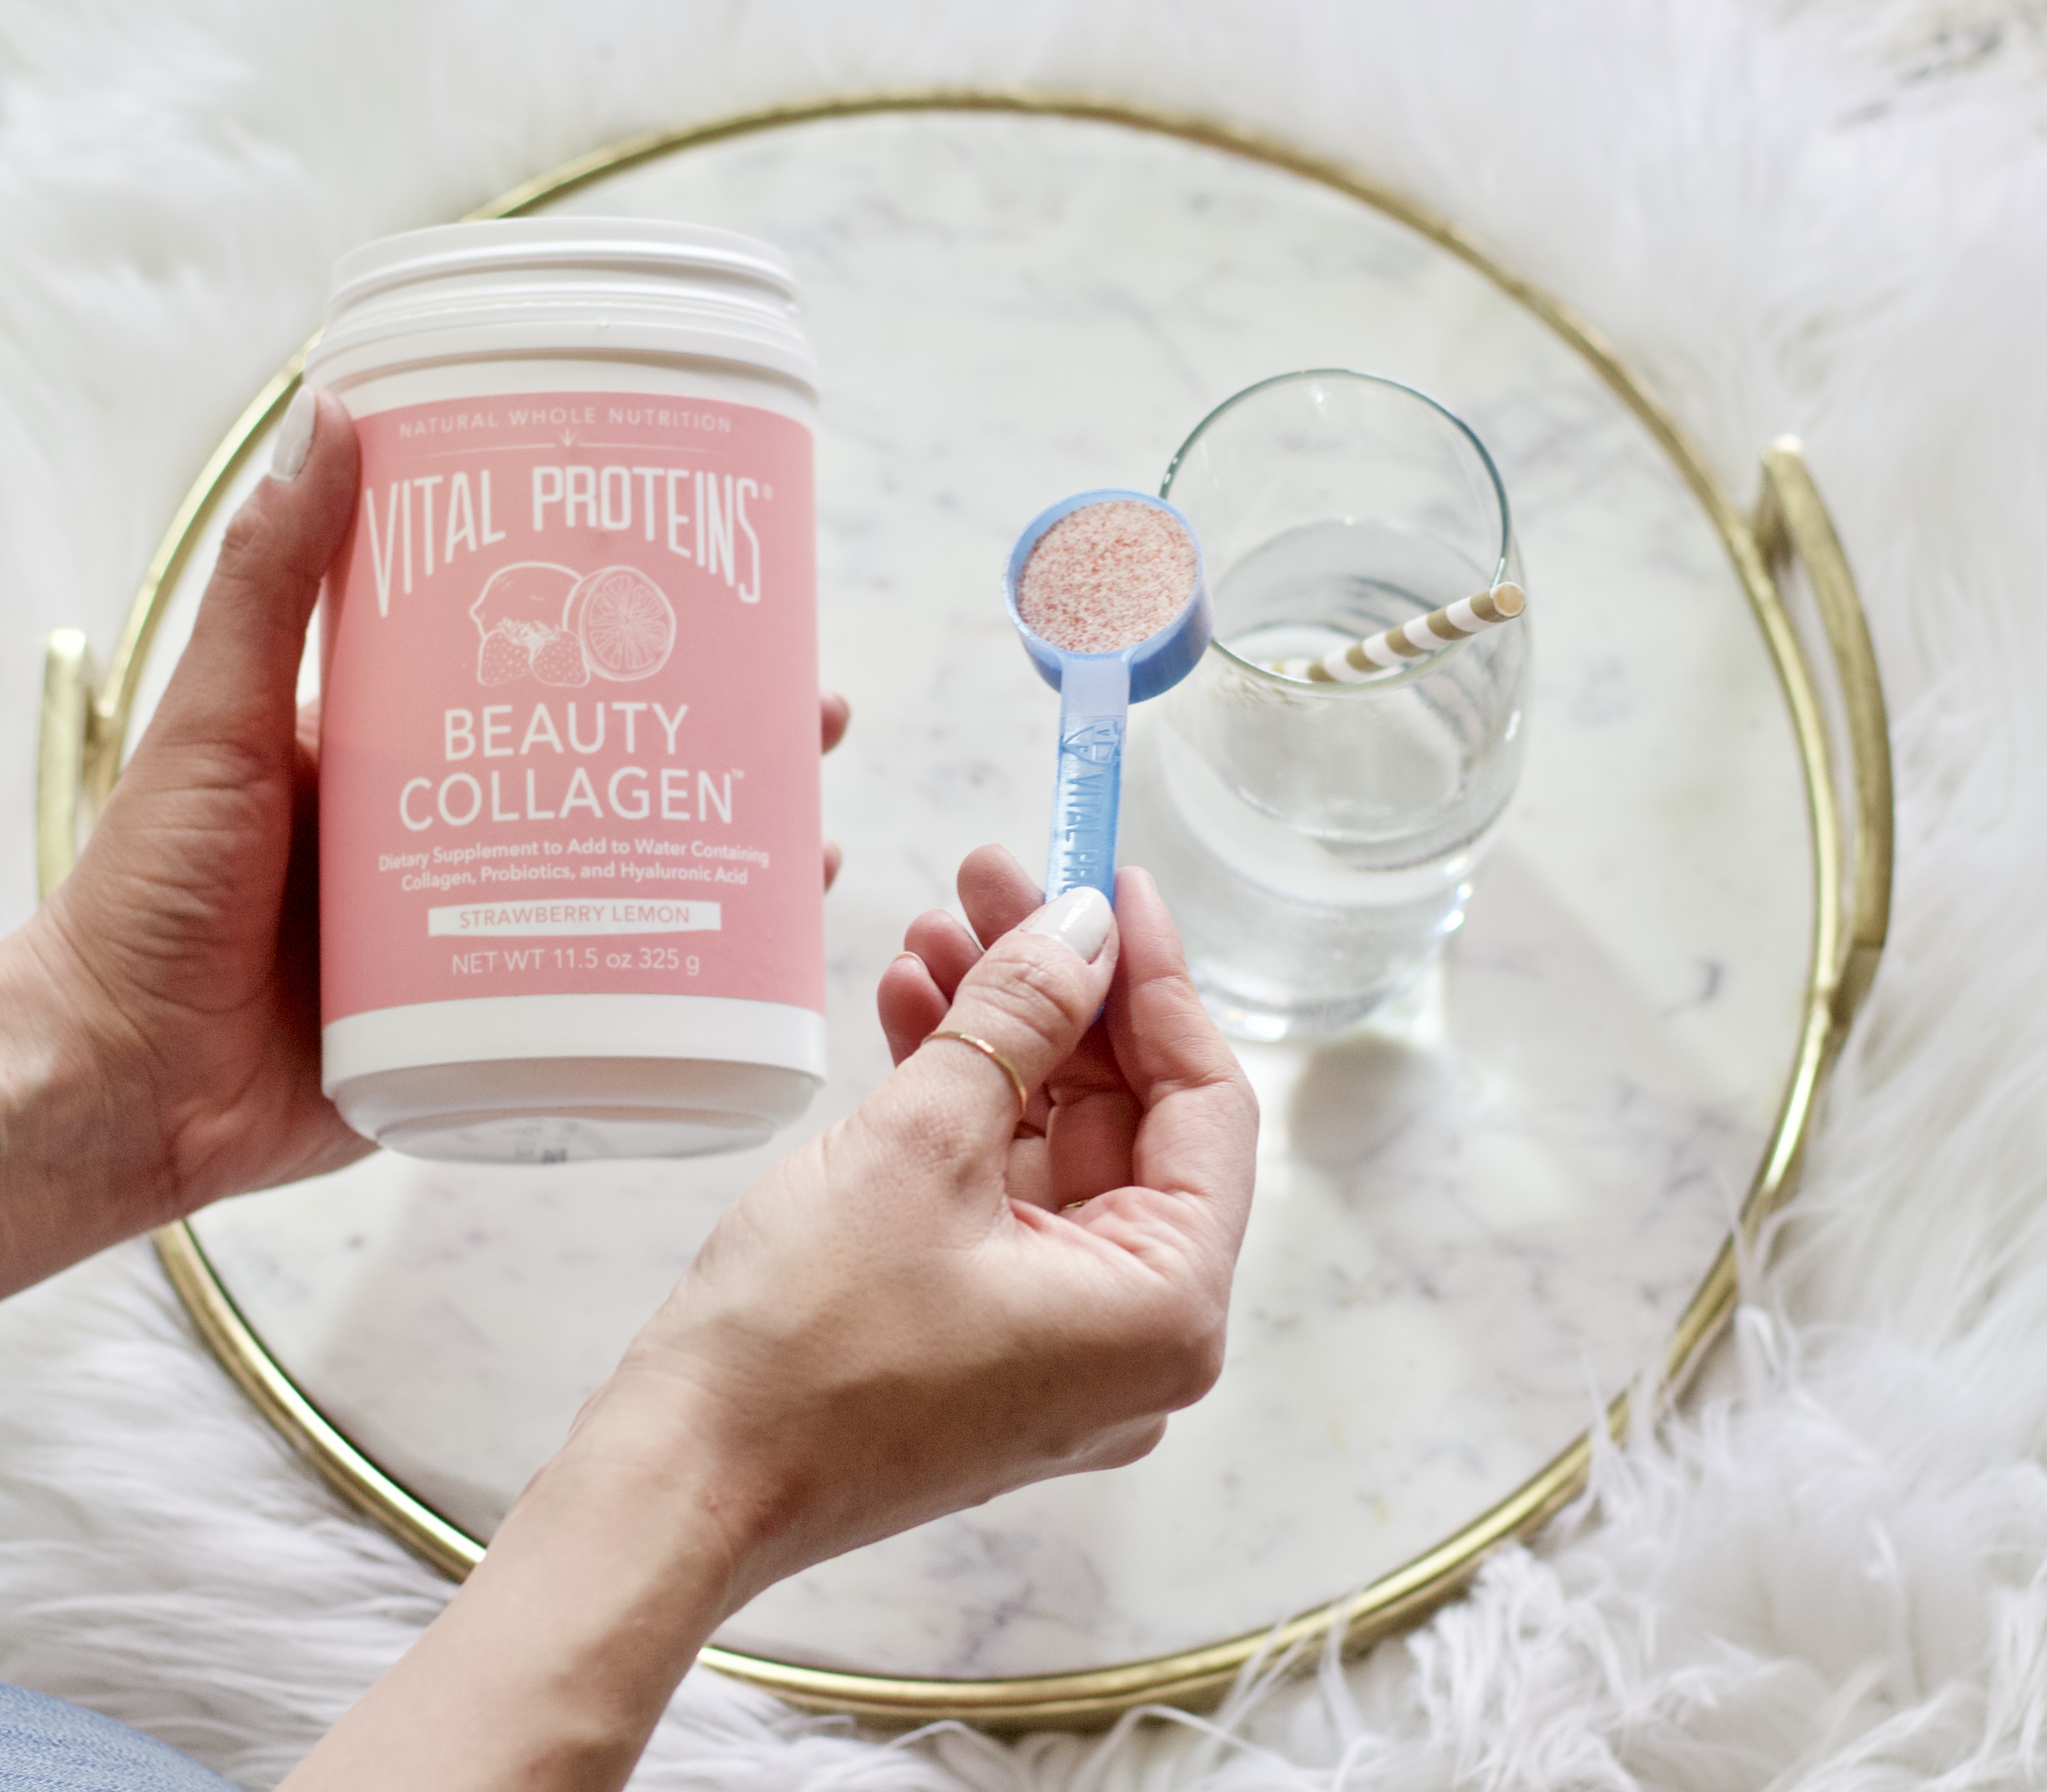 vital proteins beauty collagen #vitalproteins #collagen #cleanbeauty